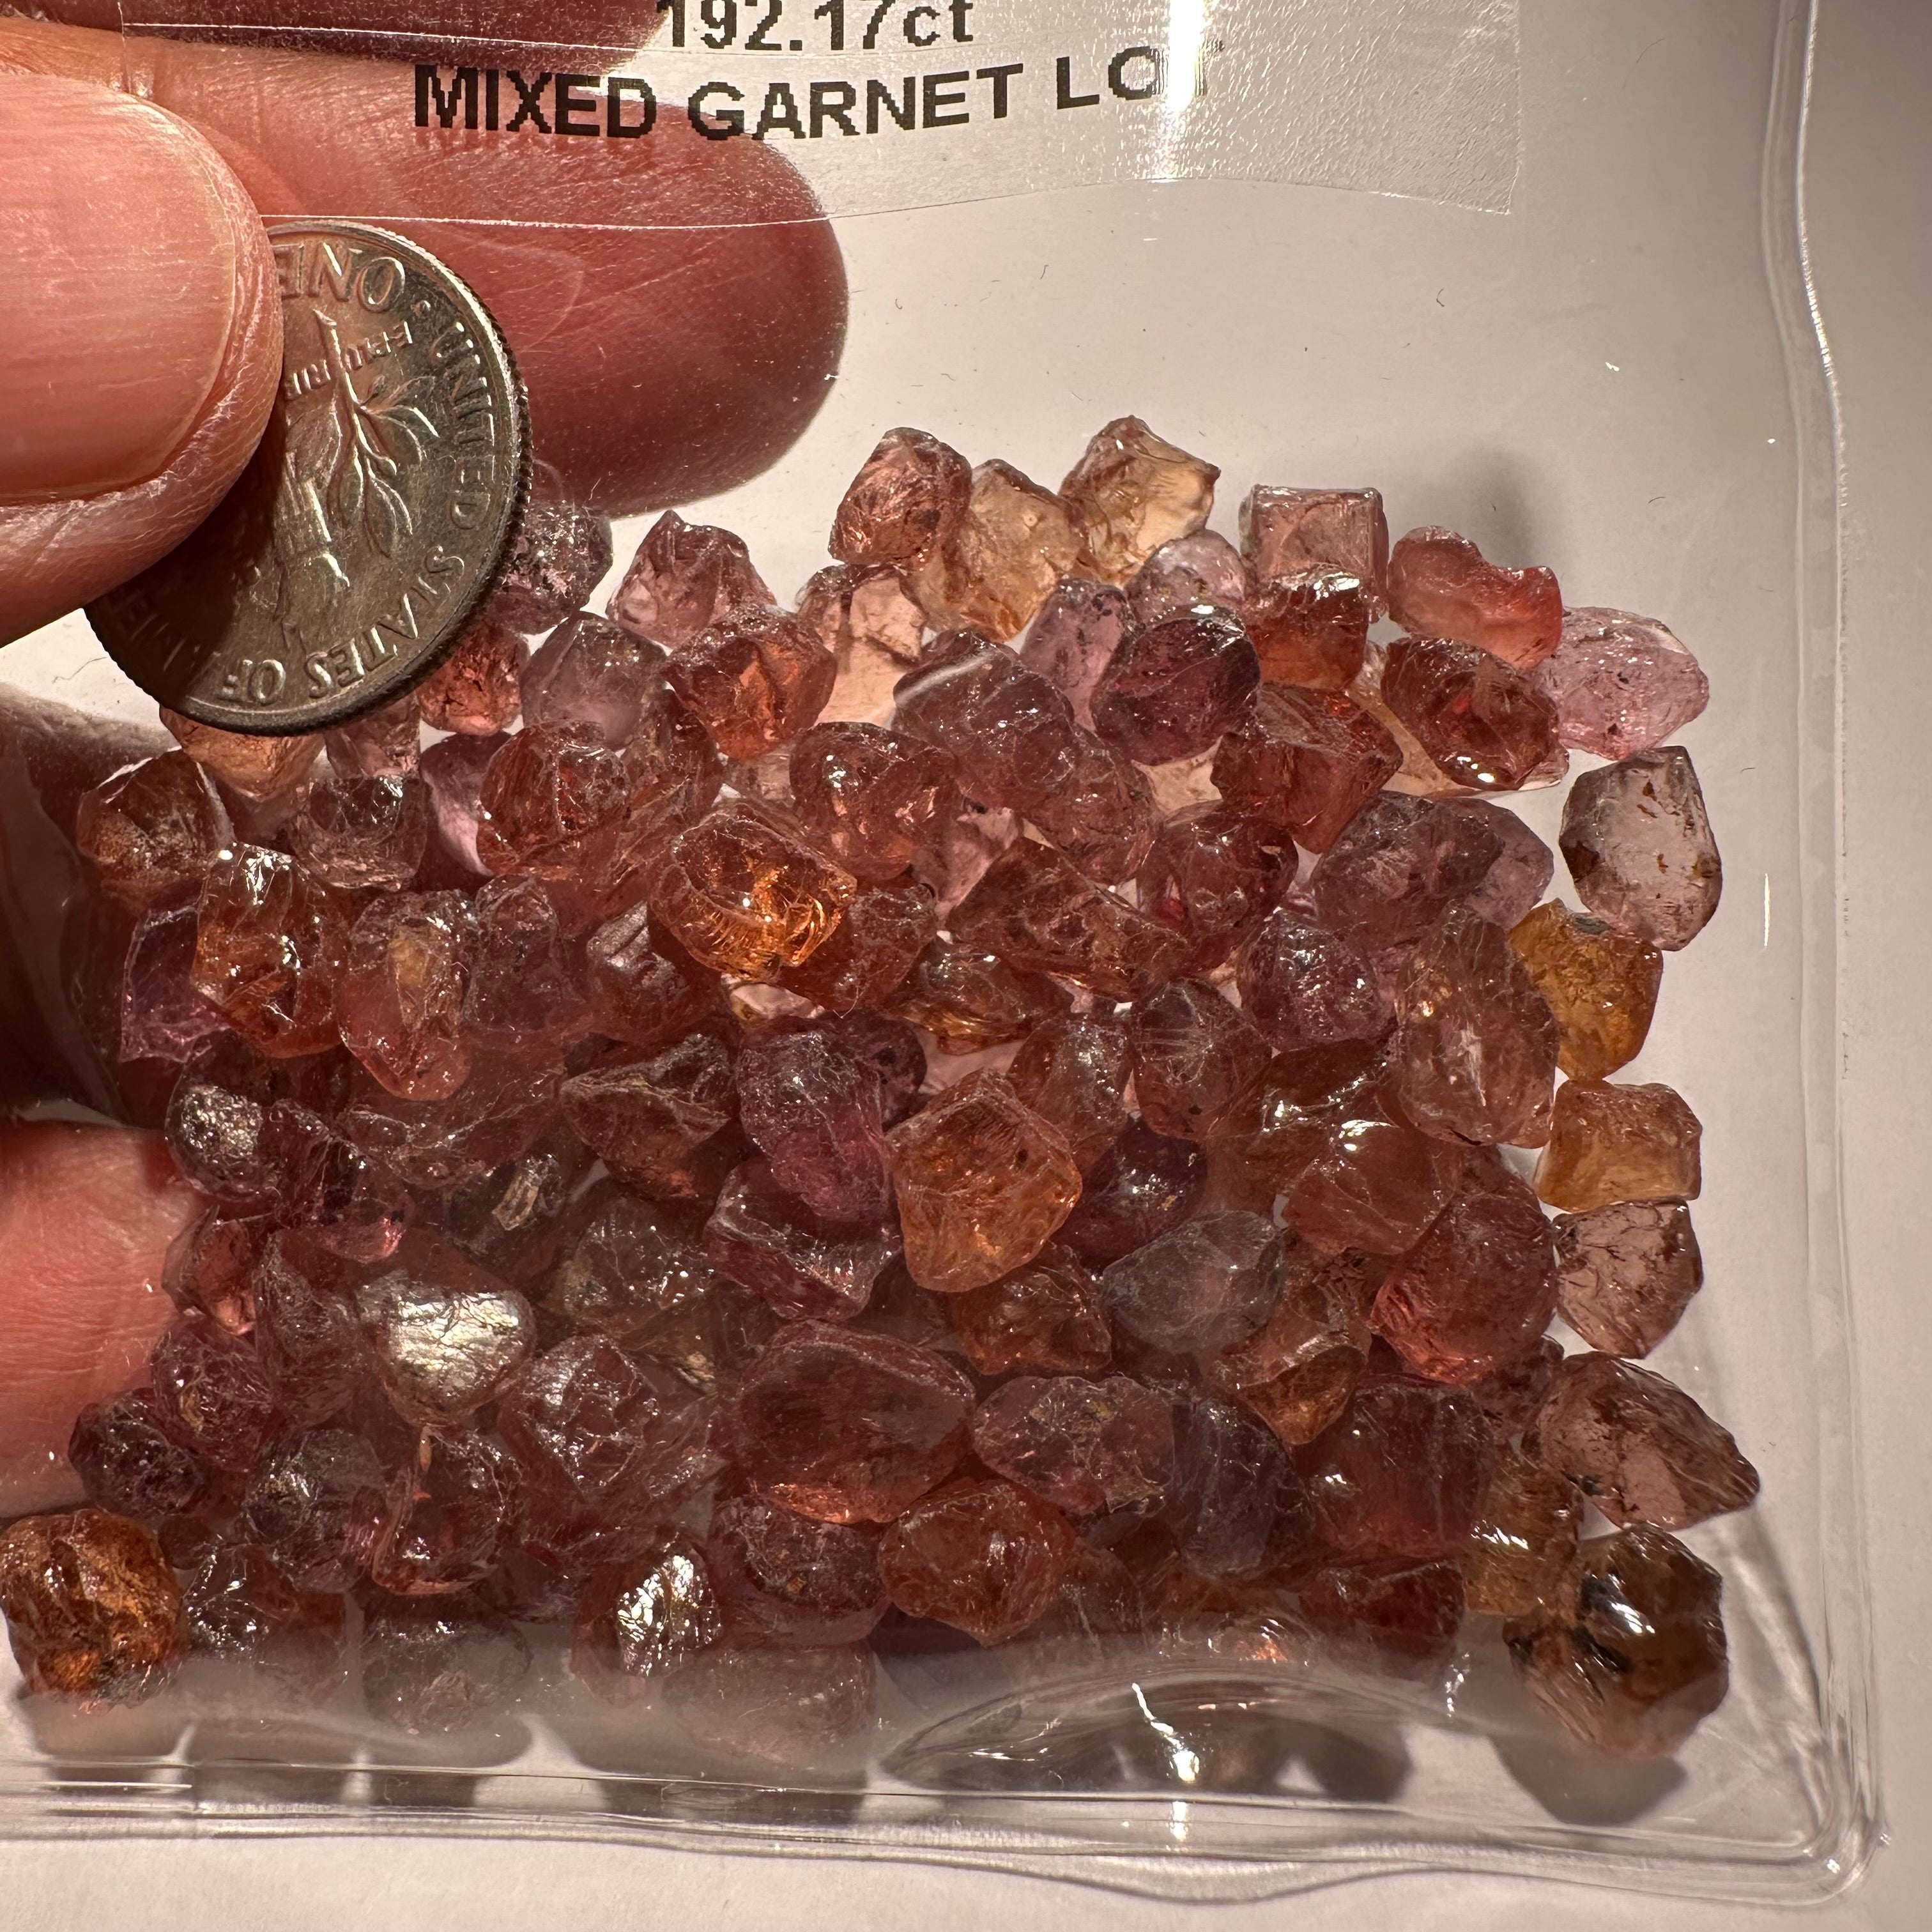 192.17ct Mixed Garnet Lot, Tanzania, Untreated Unheated, slightly included to included